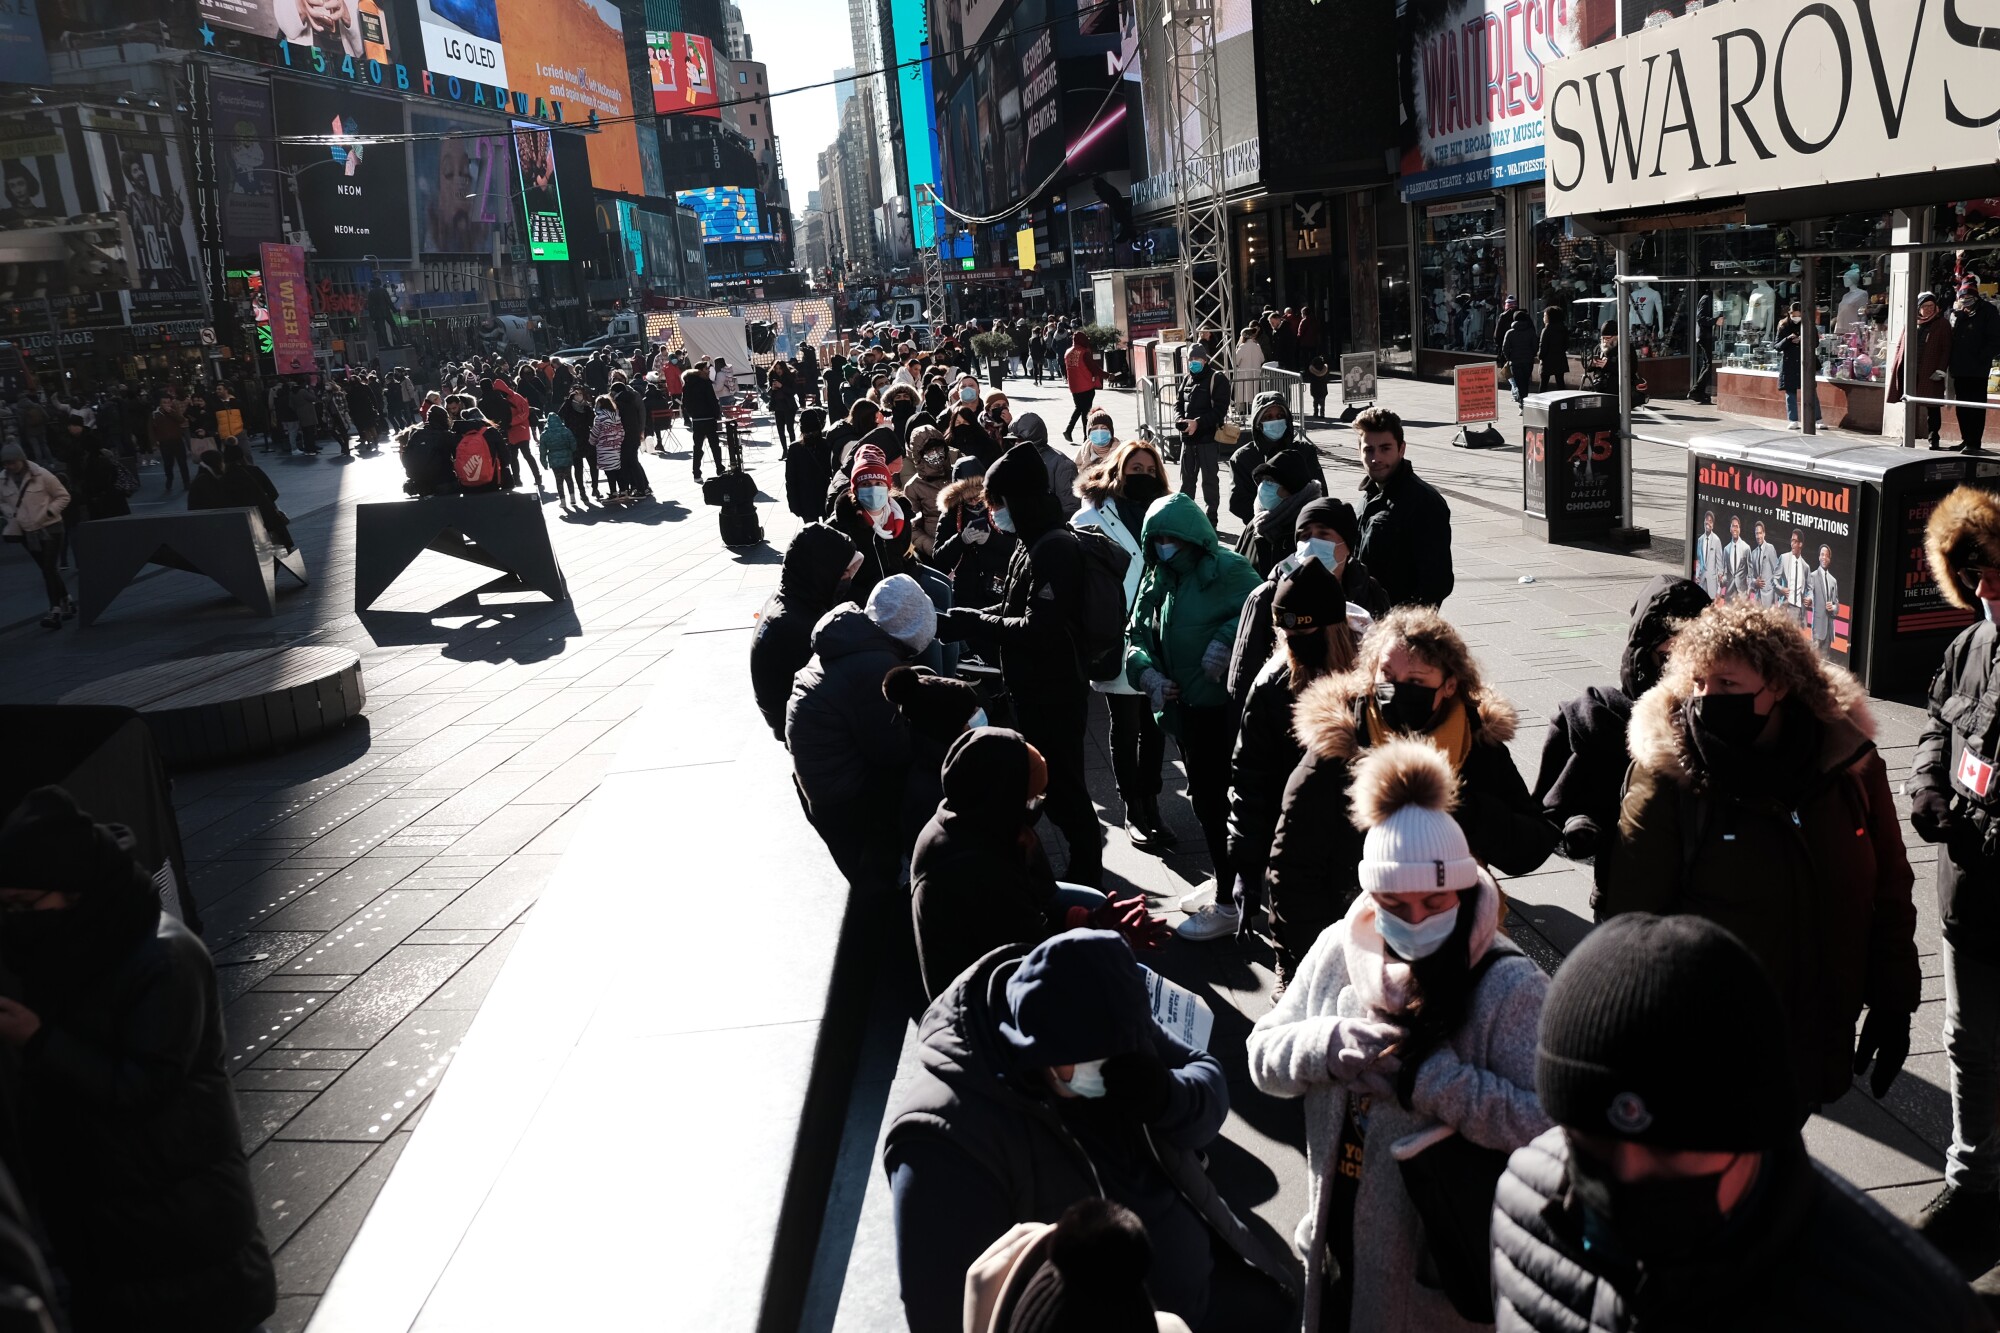 People wait in long lines in Times Square.